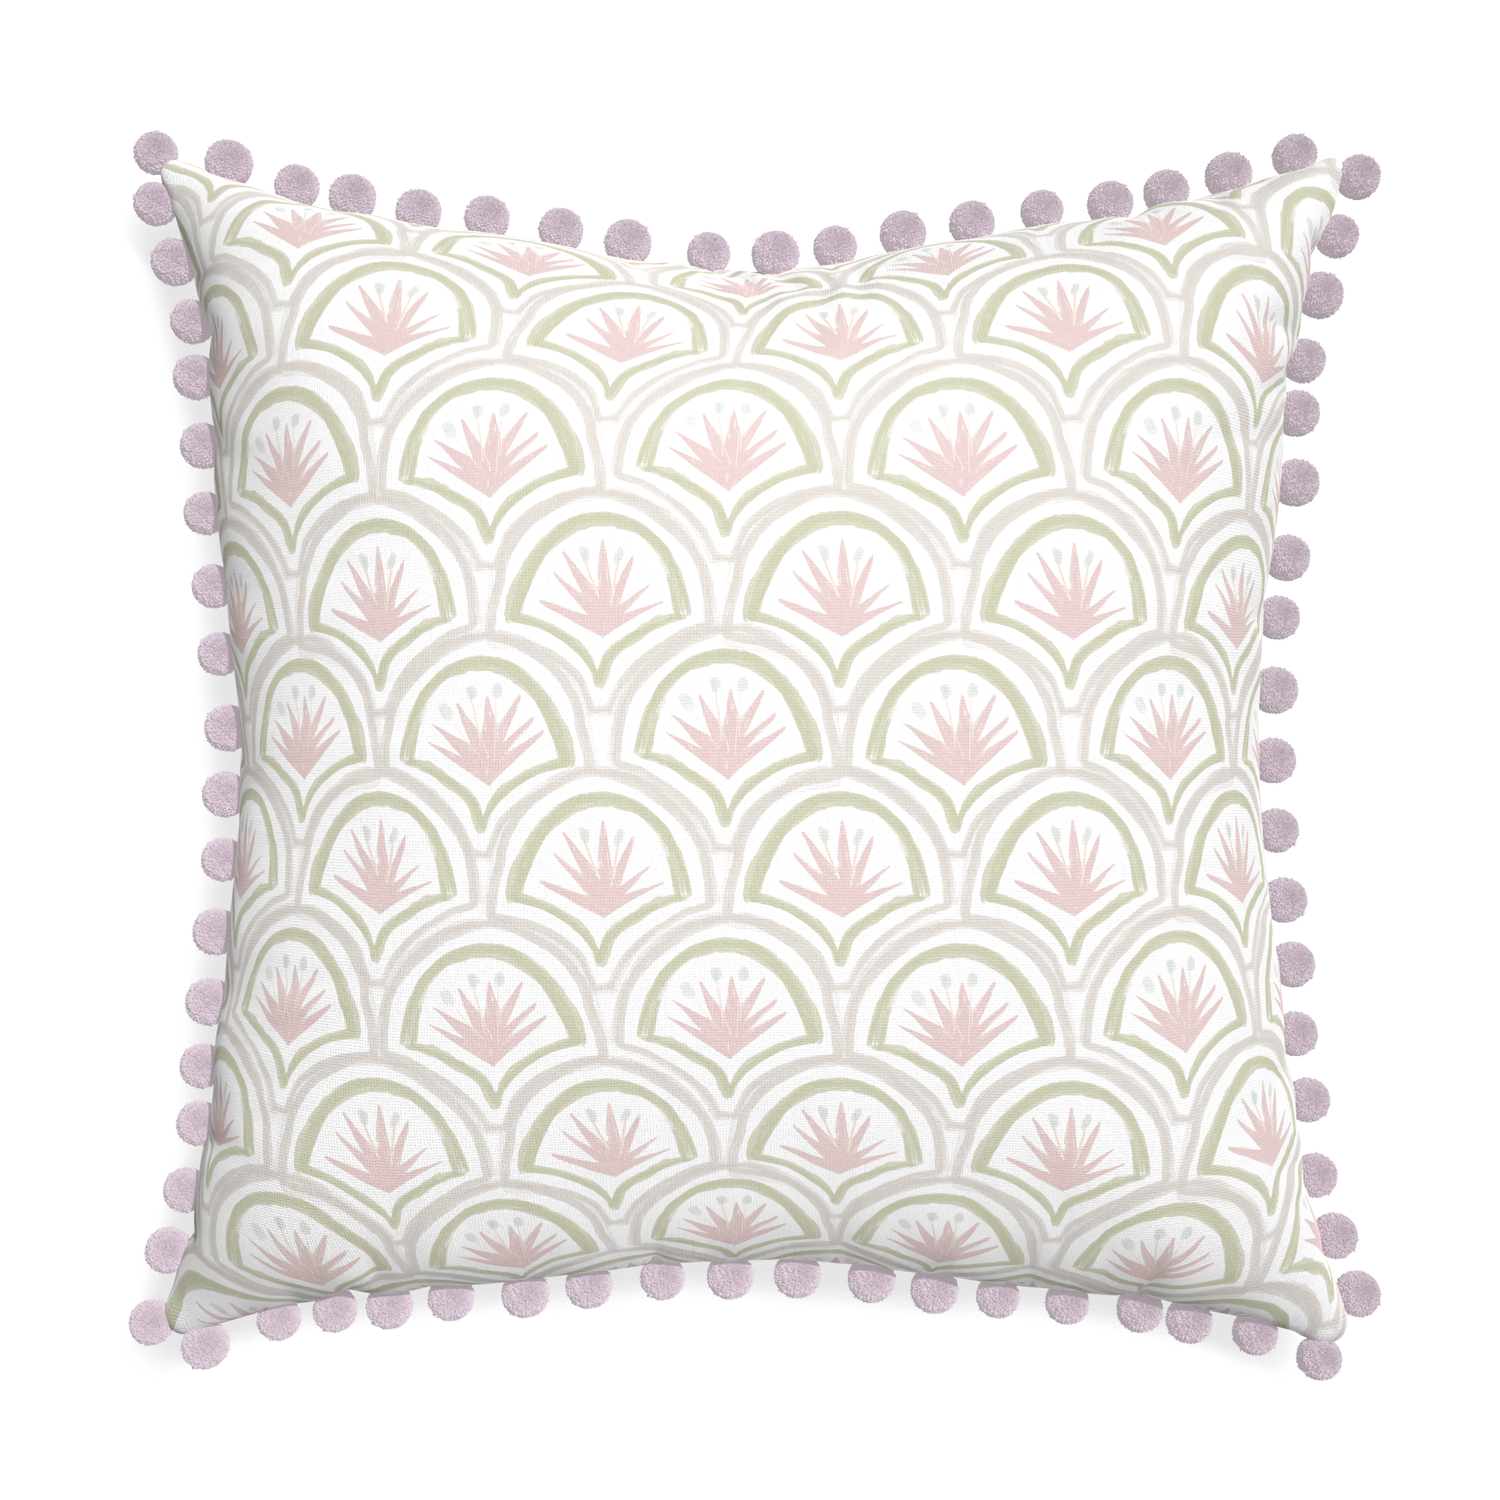 Euro-sham thatcher rose custom pillow with l on white background